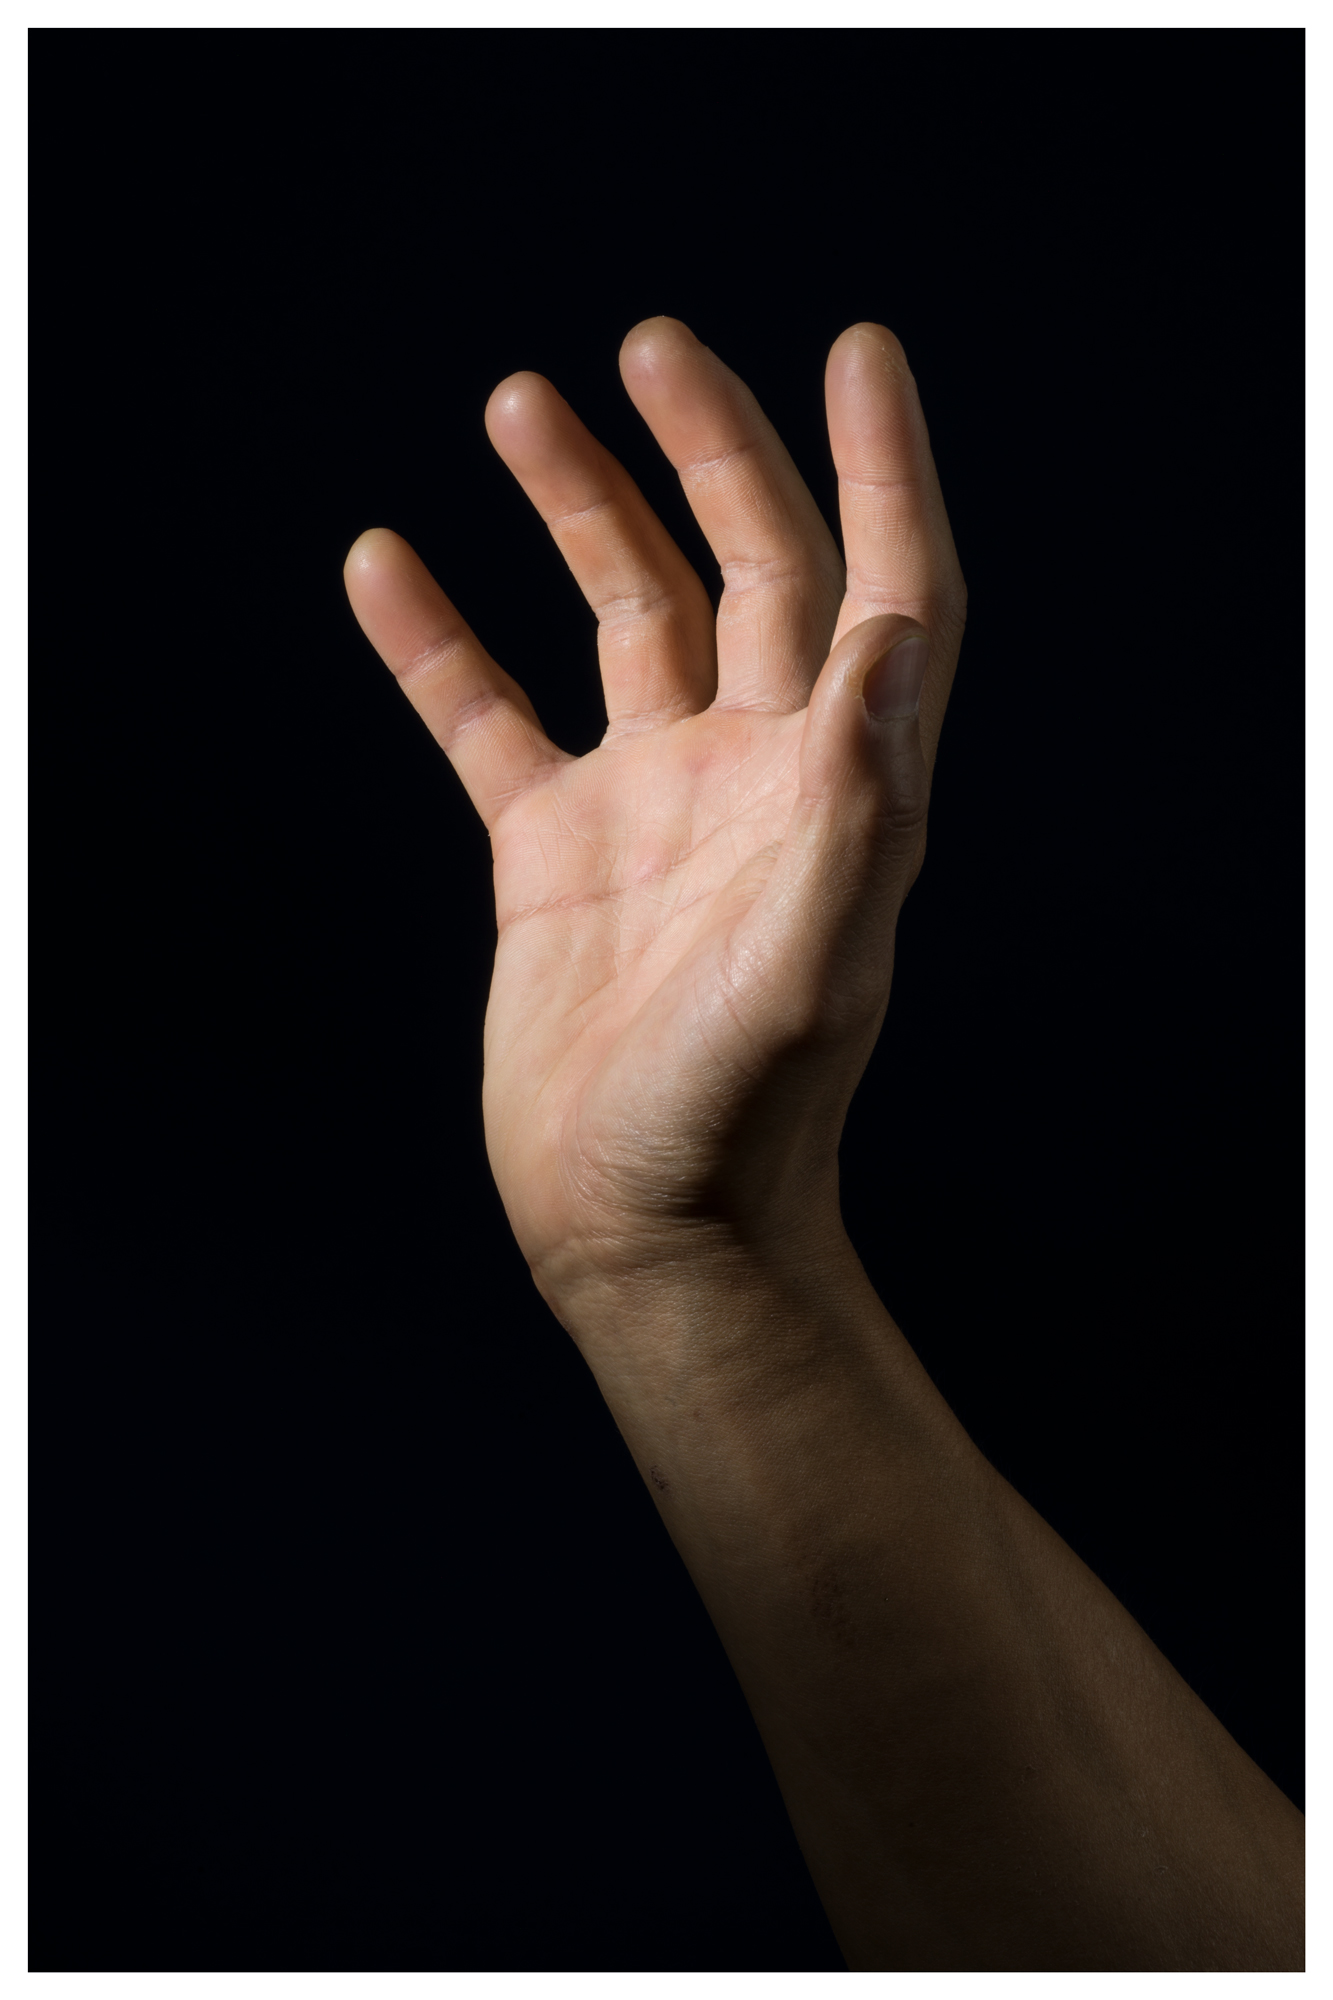 Photo of a hand on a black background